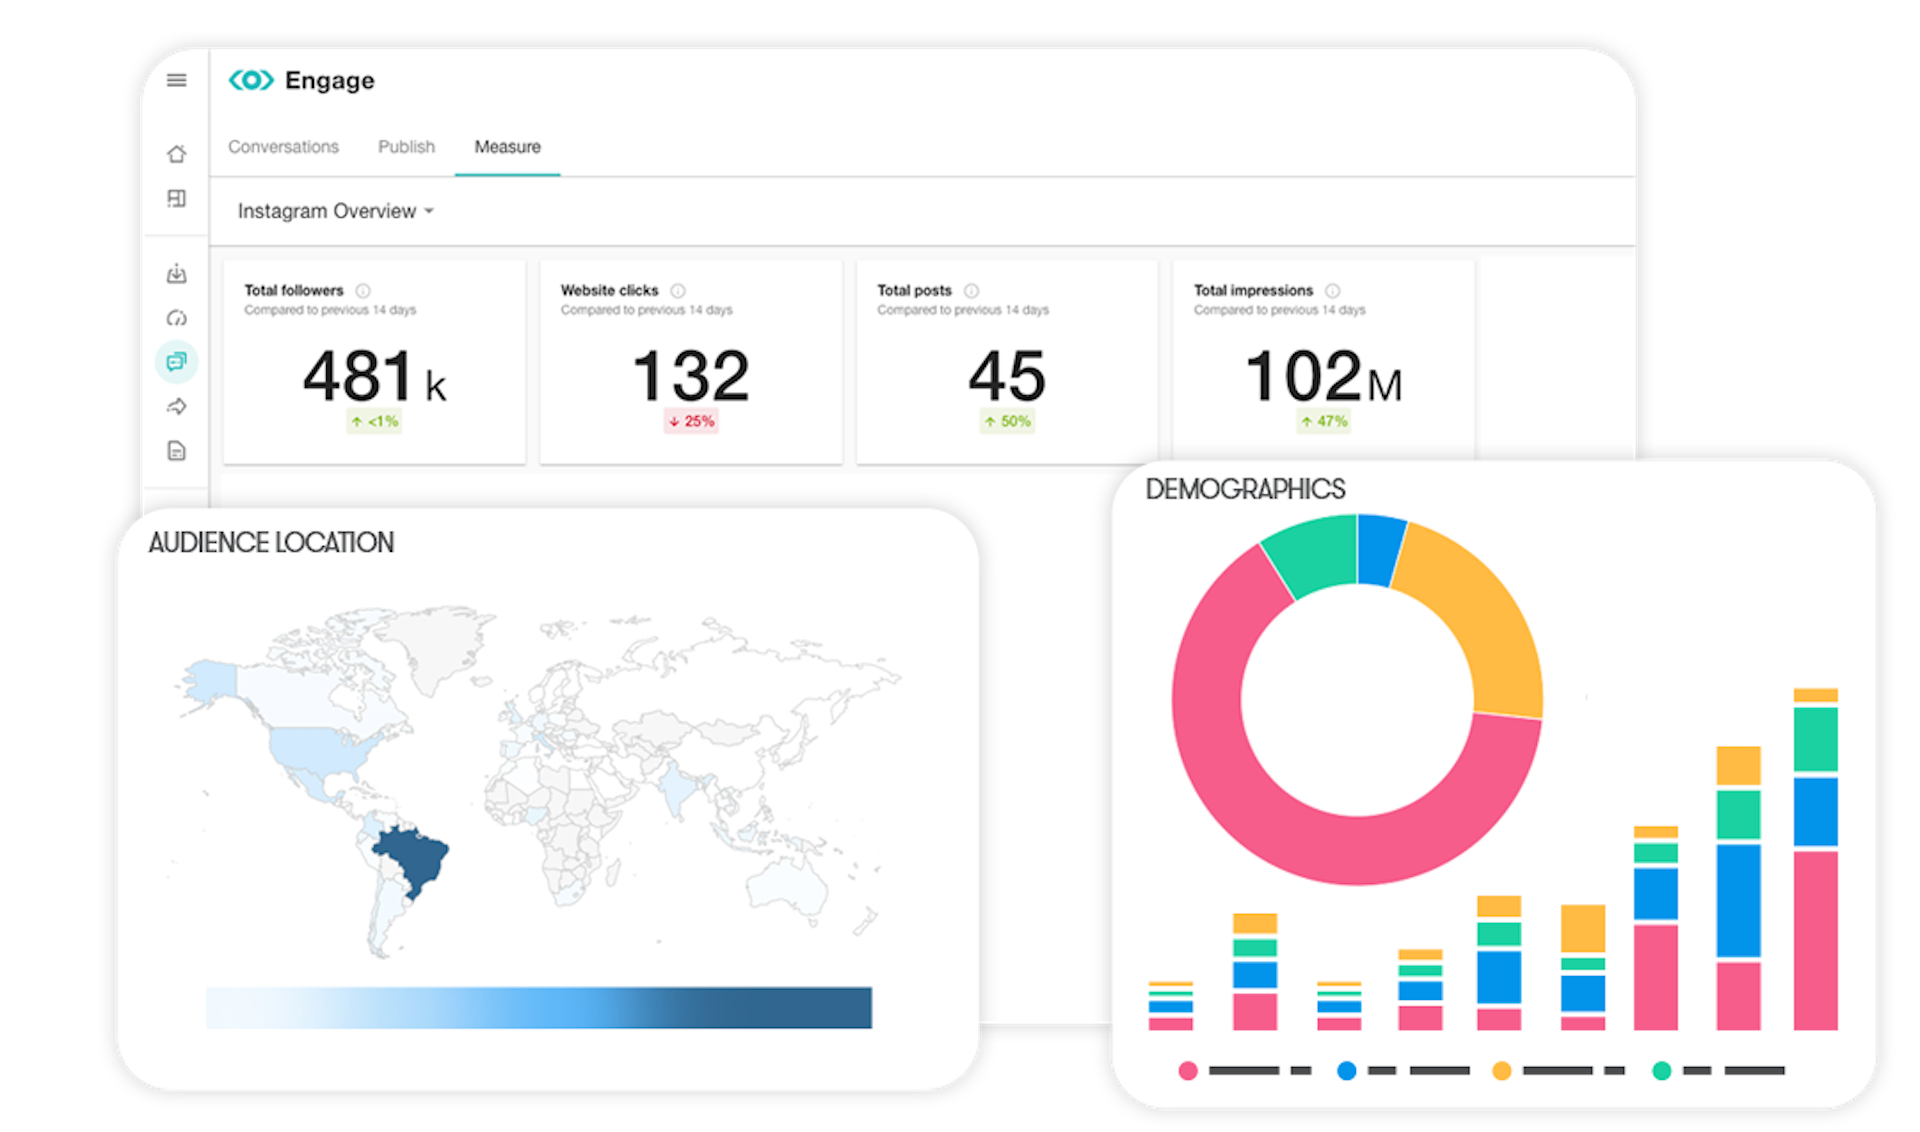 Meltwater Engage dashboard with location and demographic information.